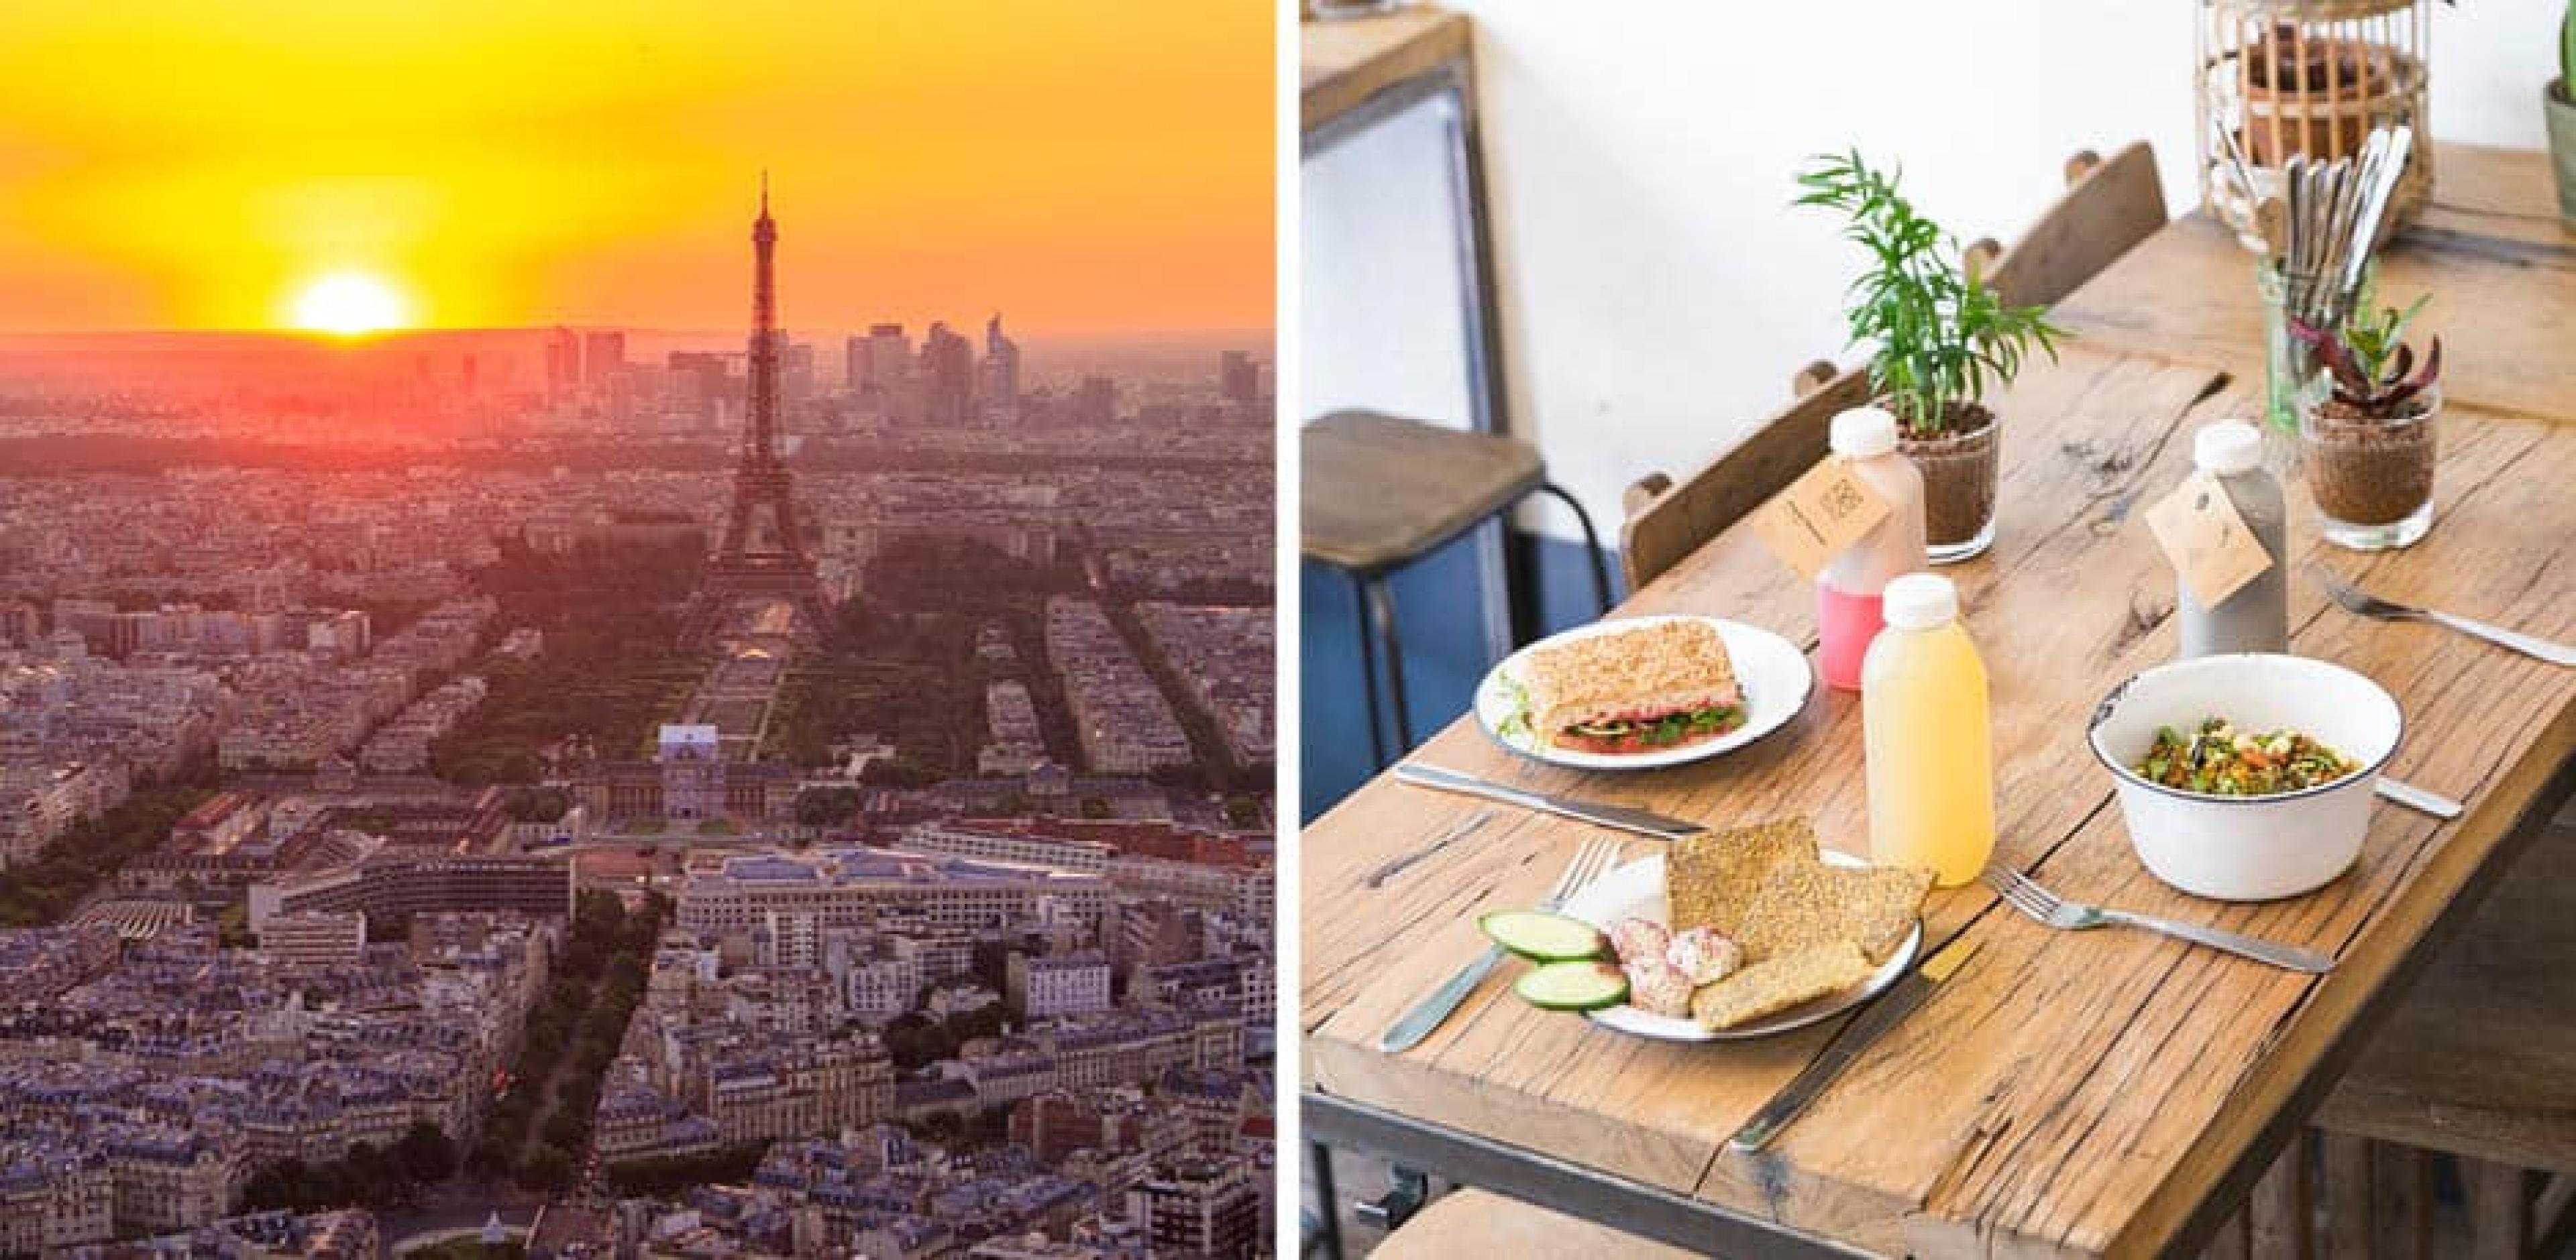 Sunset over the Paris skyline; table with lunch food at Wild & The Moon restaurant in Paris